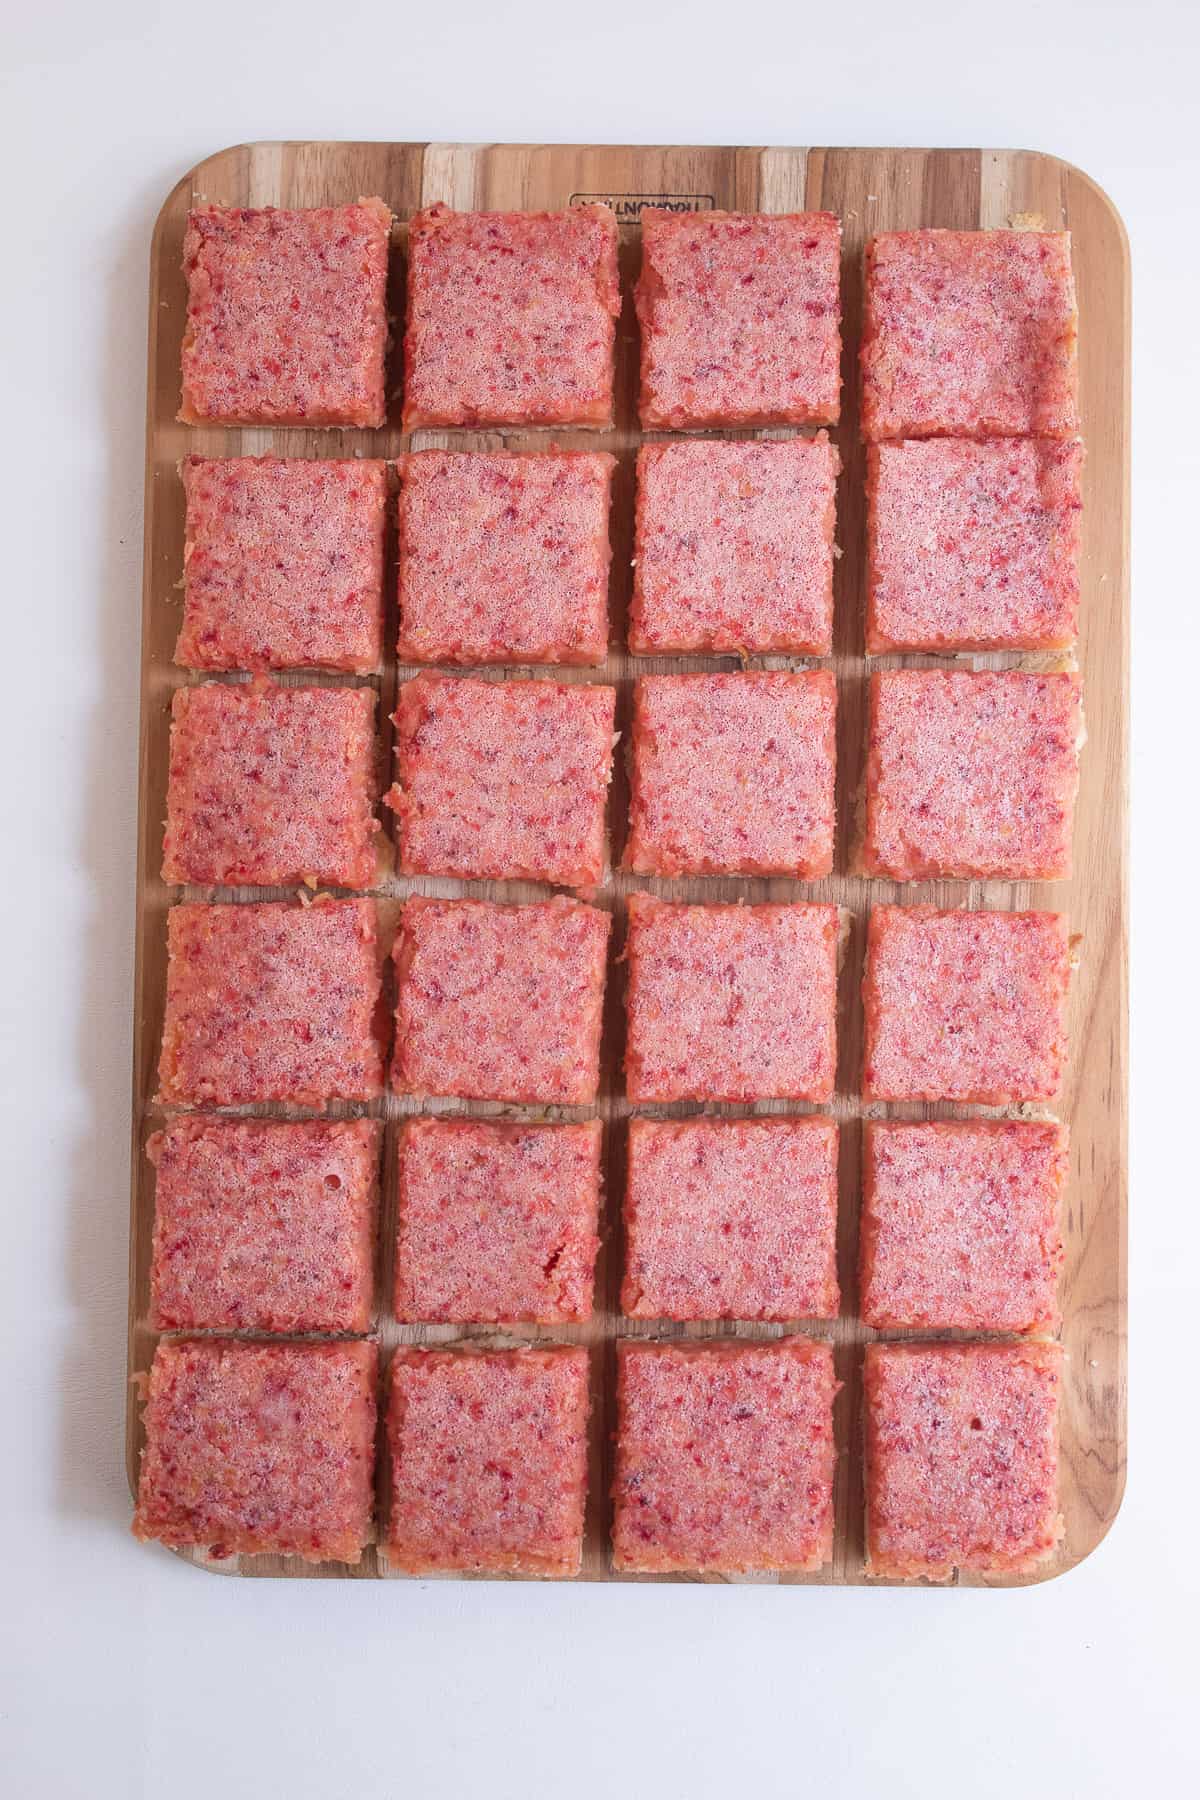 The trimmed pan of bars is cut into 24 squares for serving.